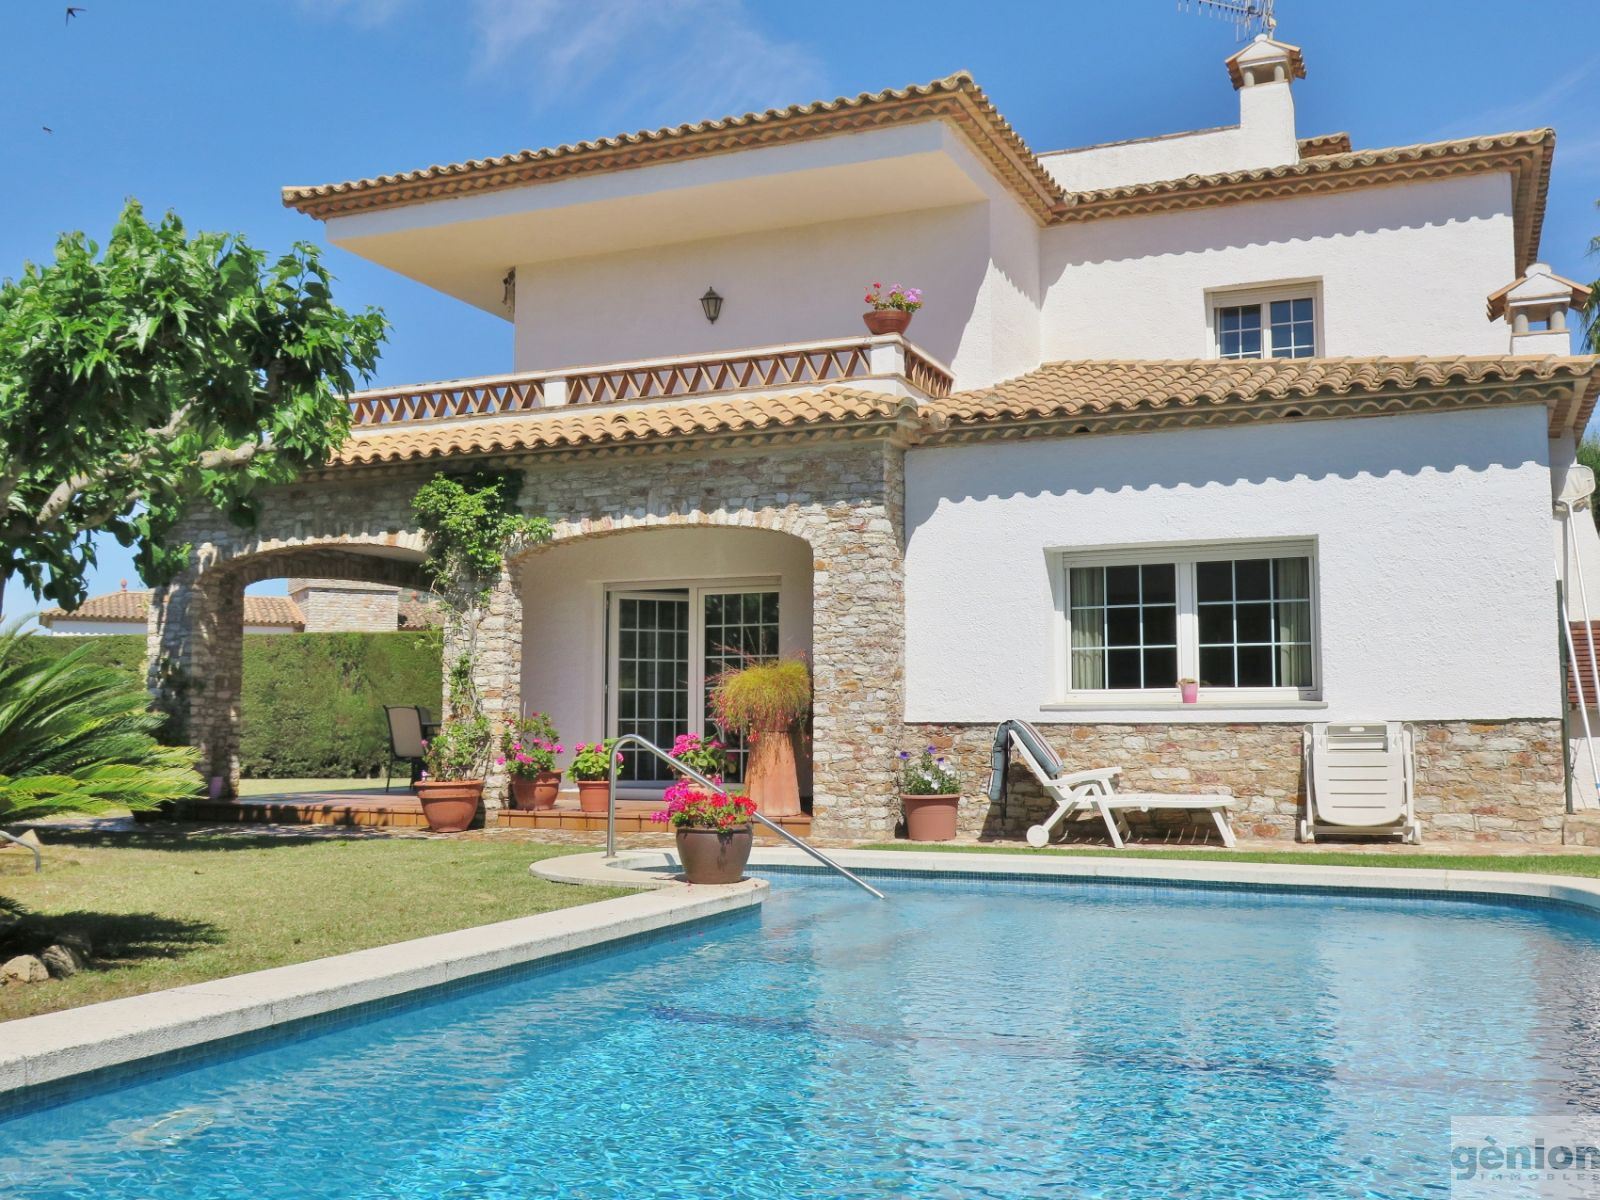 DETACHED HOUSE IN TORREBOSCA, PLATJA D’ARO. RIGHT NEXT TO THE TOWN CENTRE